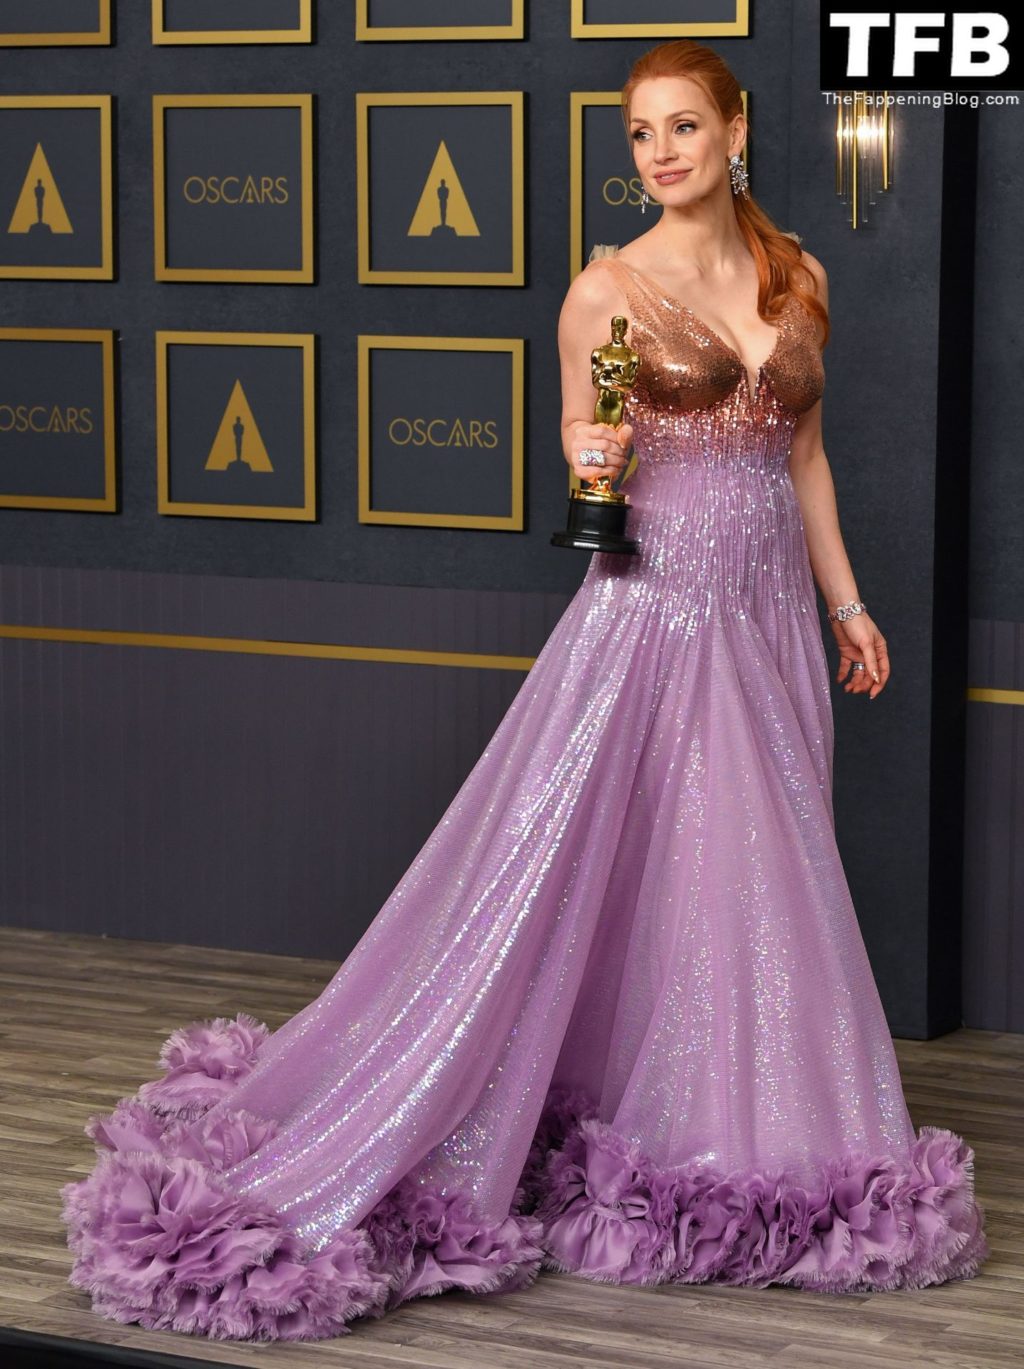 Jessica Chastain Sexy The Fappening Blog 44 1 1024x1369 - Jessica Chastain Poses With Her Oscar at the 94th Academy Awards (150 Photos)